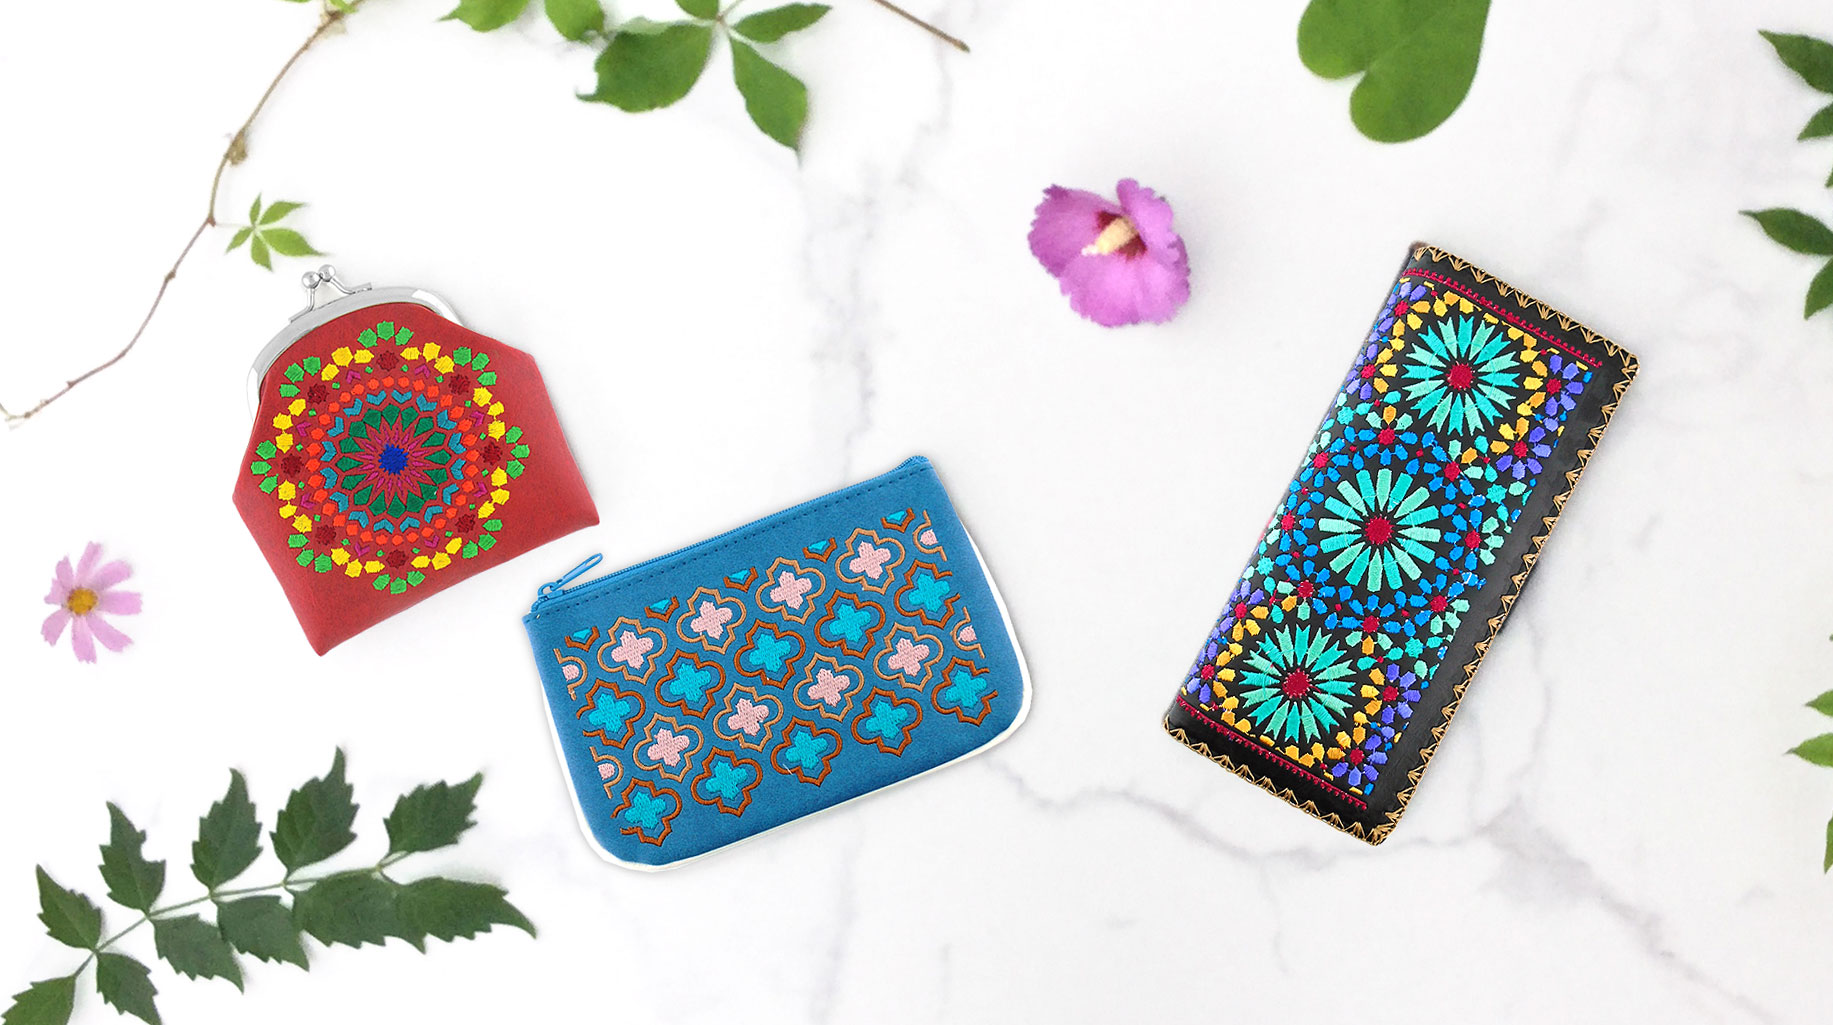 Lavishy design & wholesale original, beautiful and affordable travel themed vegan bags, wallets and accessories--these are great travel gift ideas